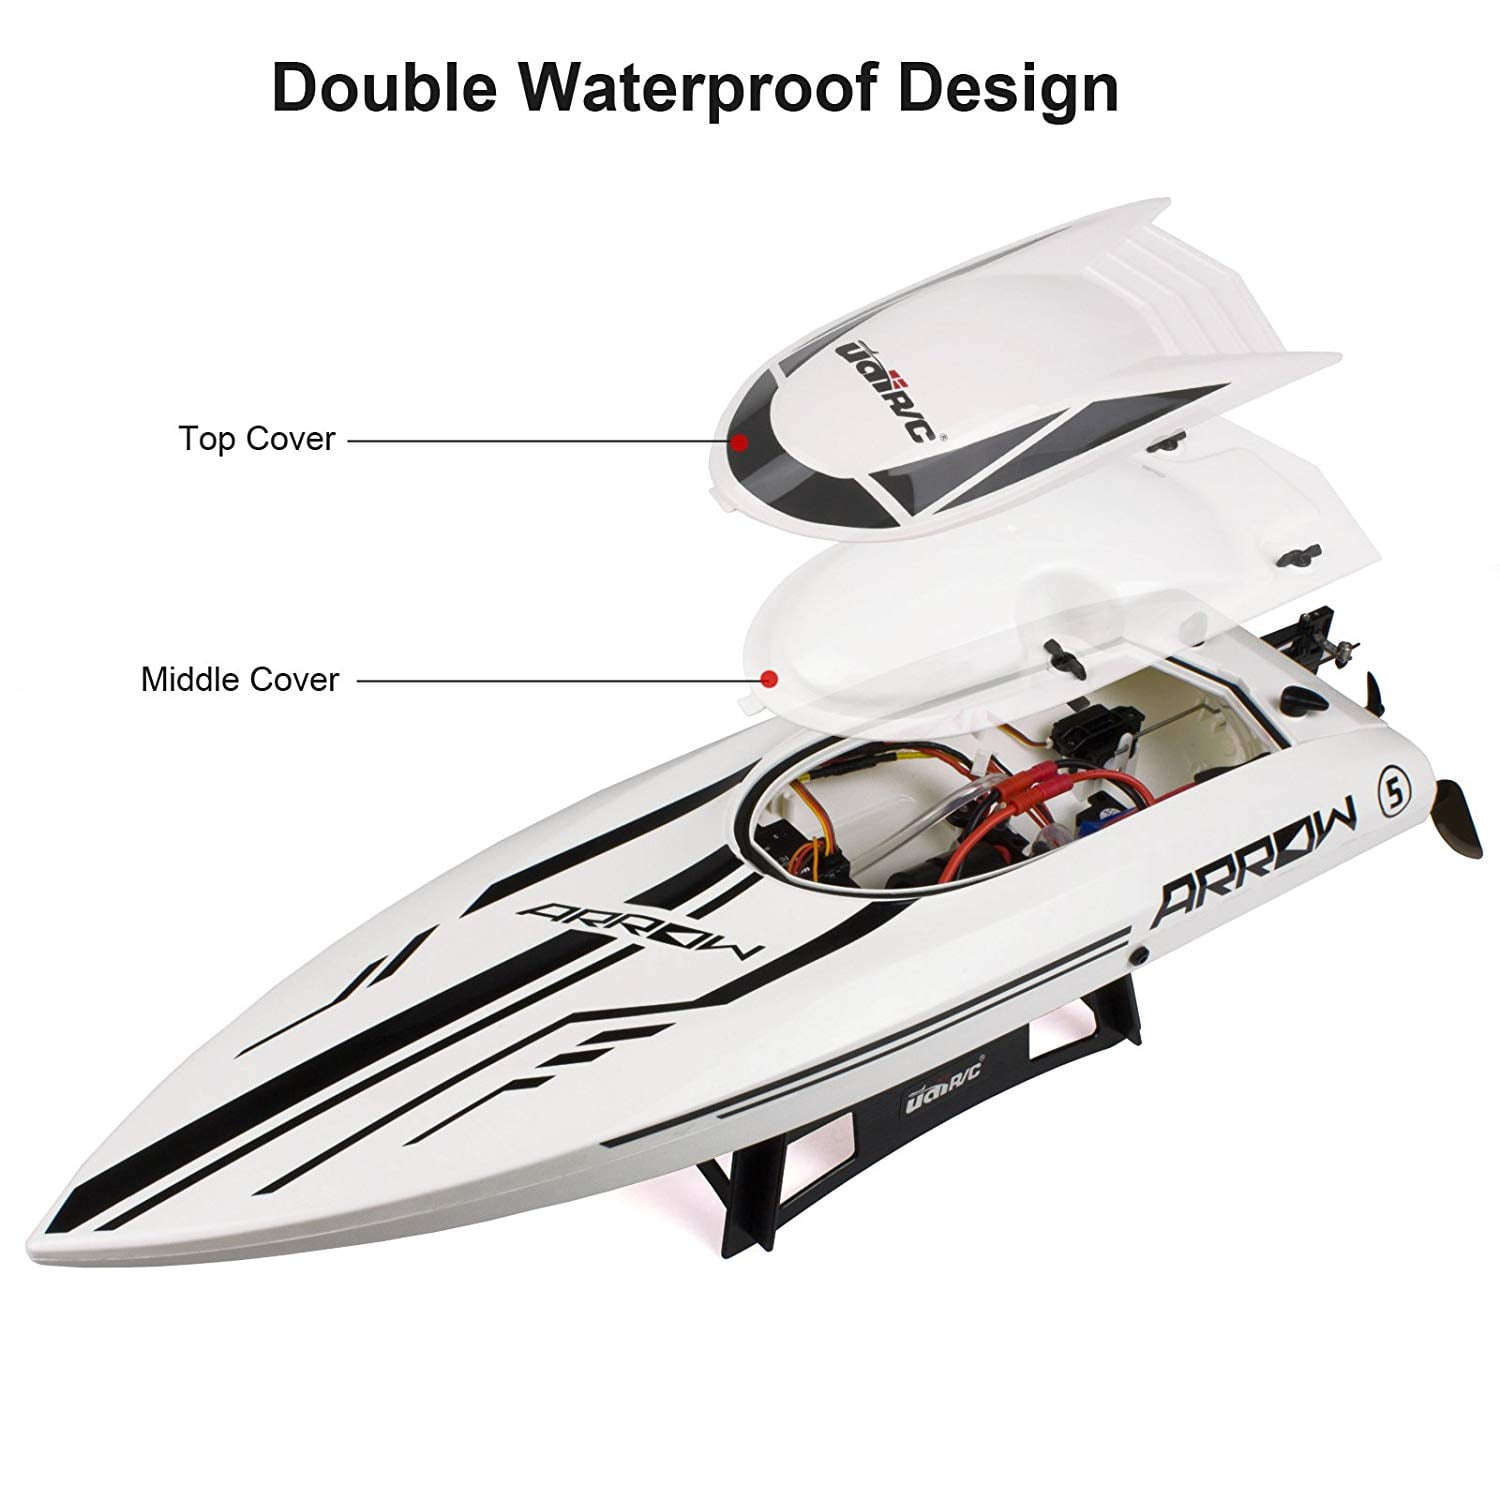 UDI005 High Speed Brushless RC Racing Boat Electronic Remote Control Boat Gift 